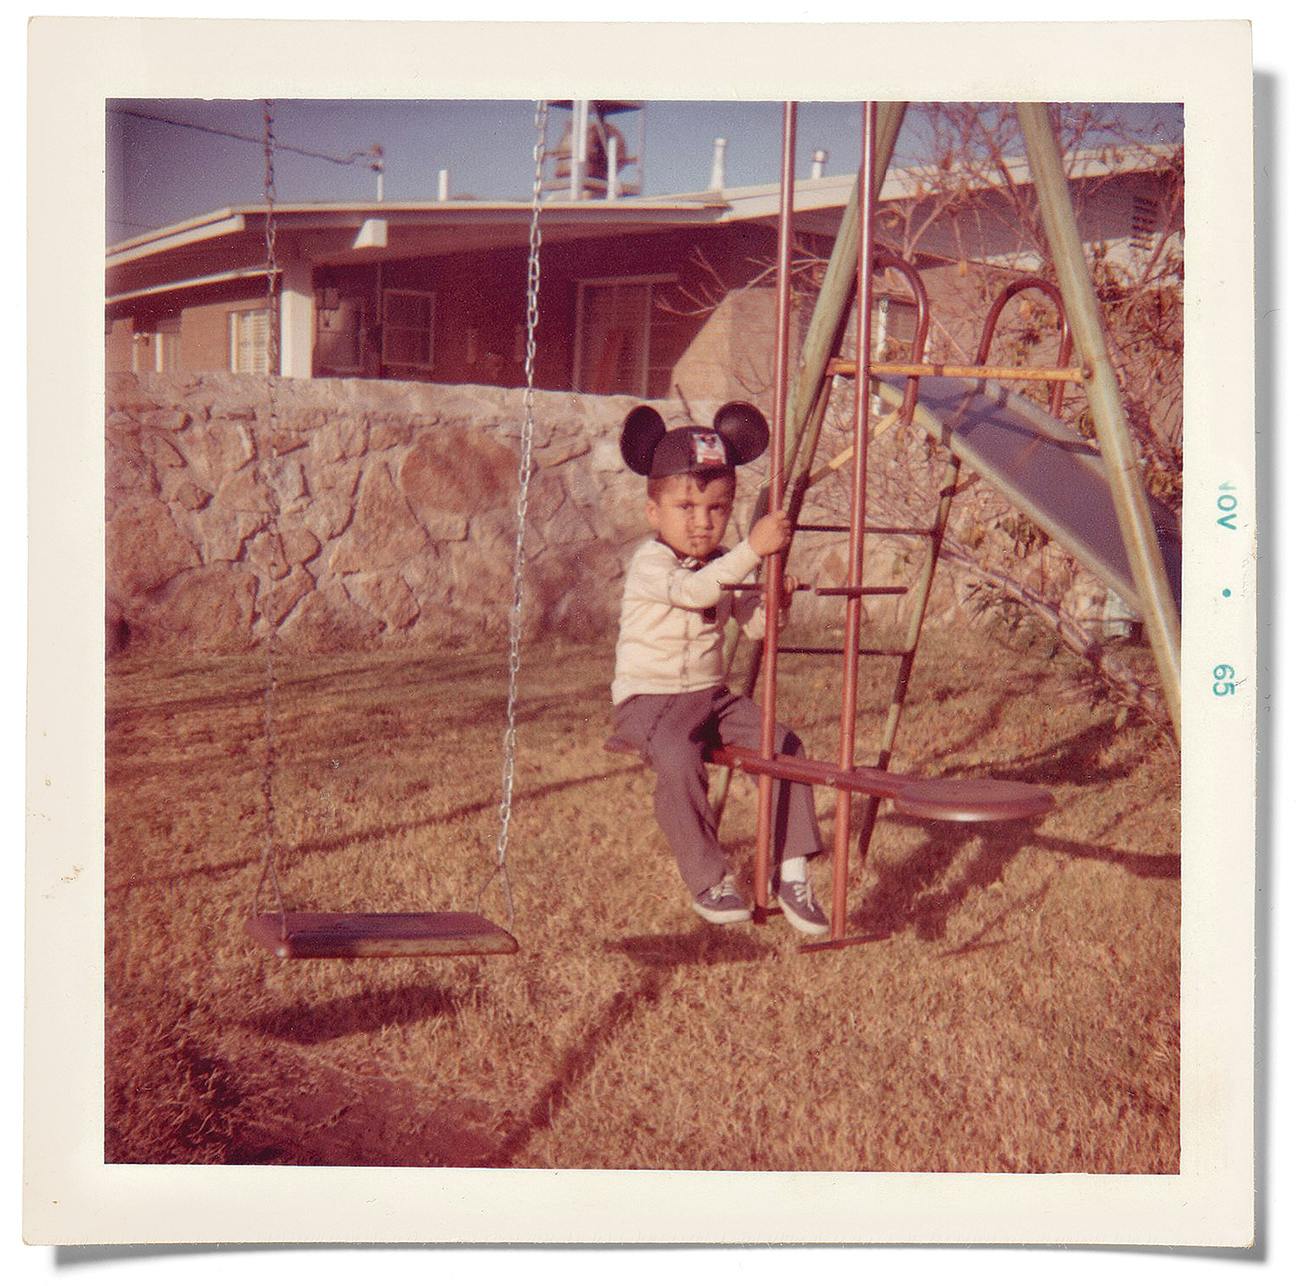 The author playing on his swing set in El Paso in 1965.